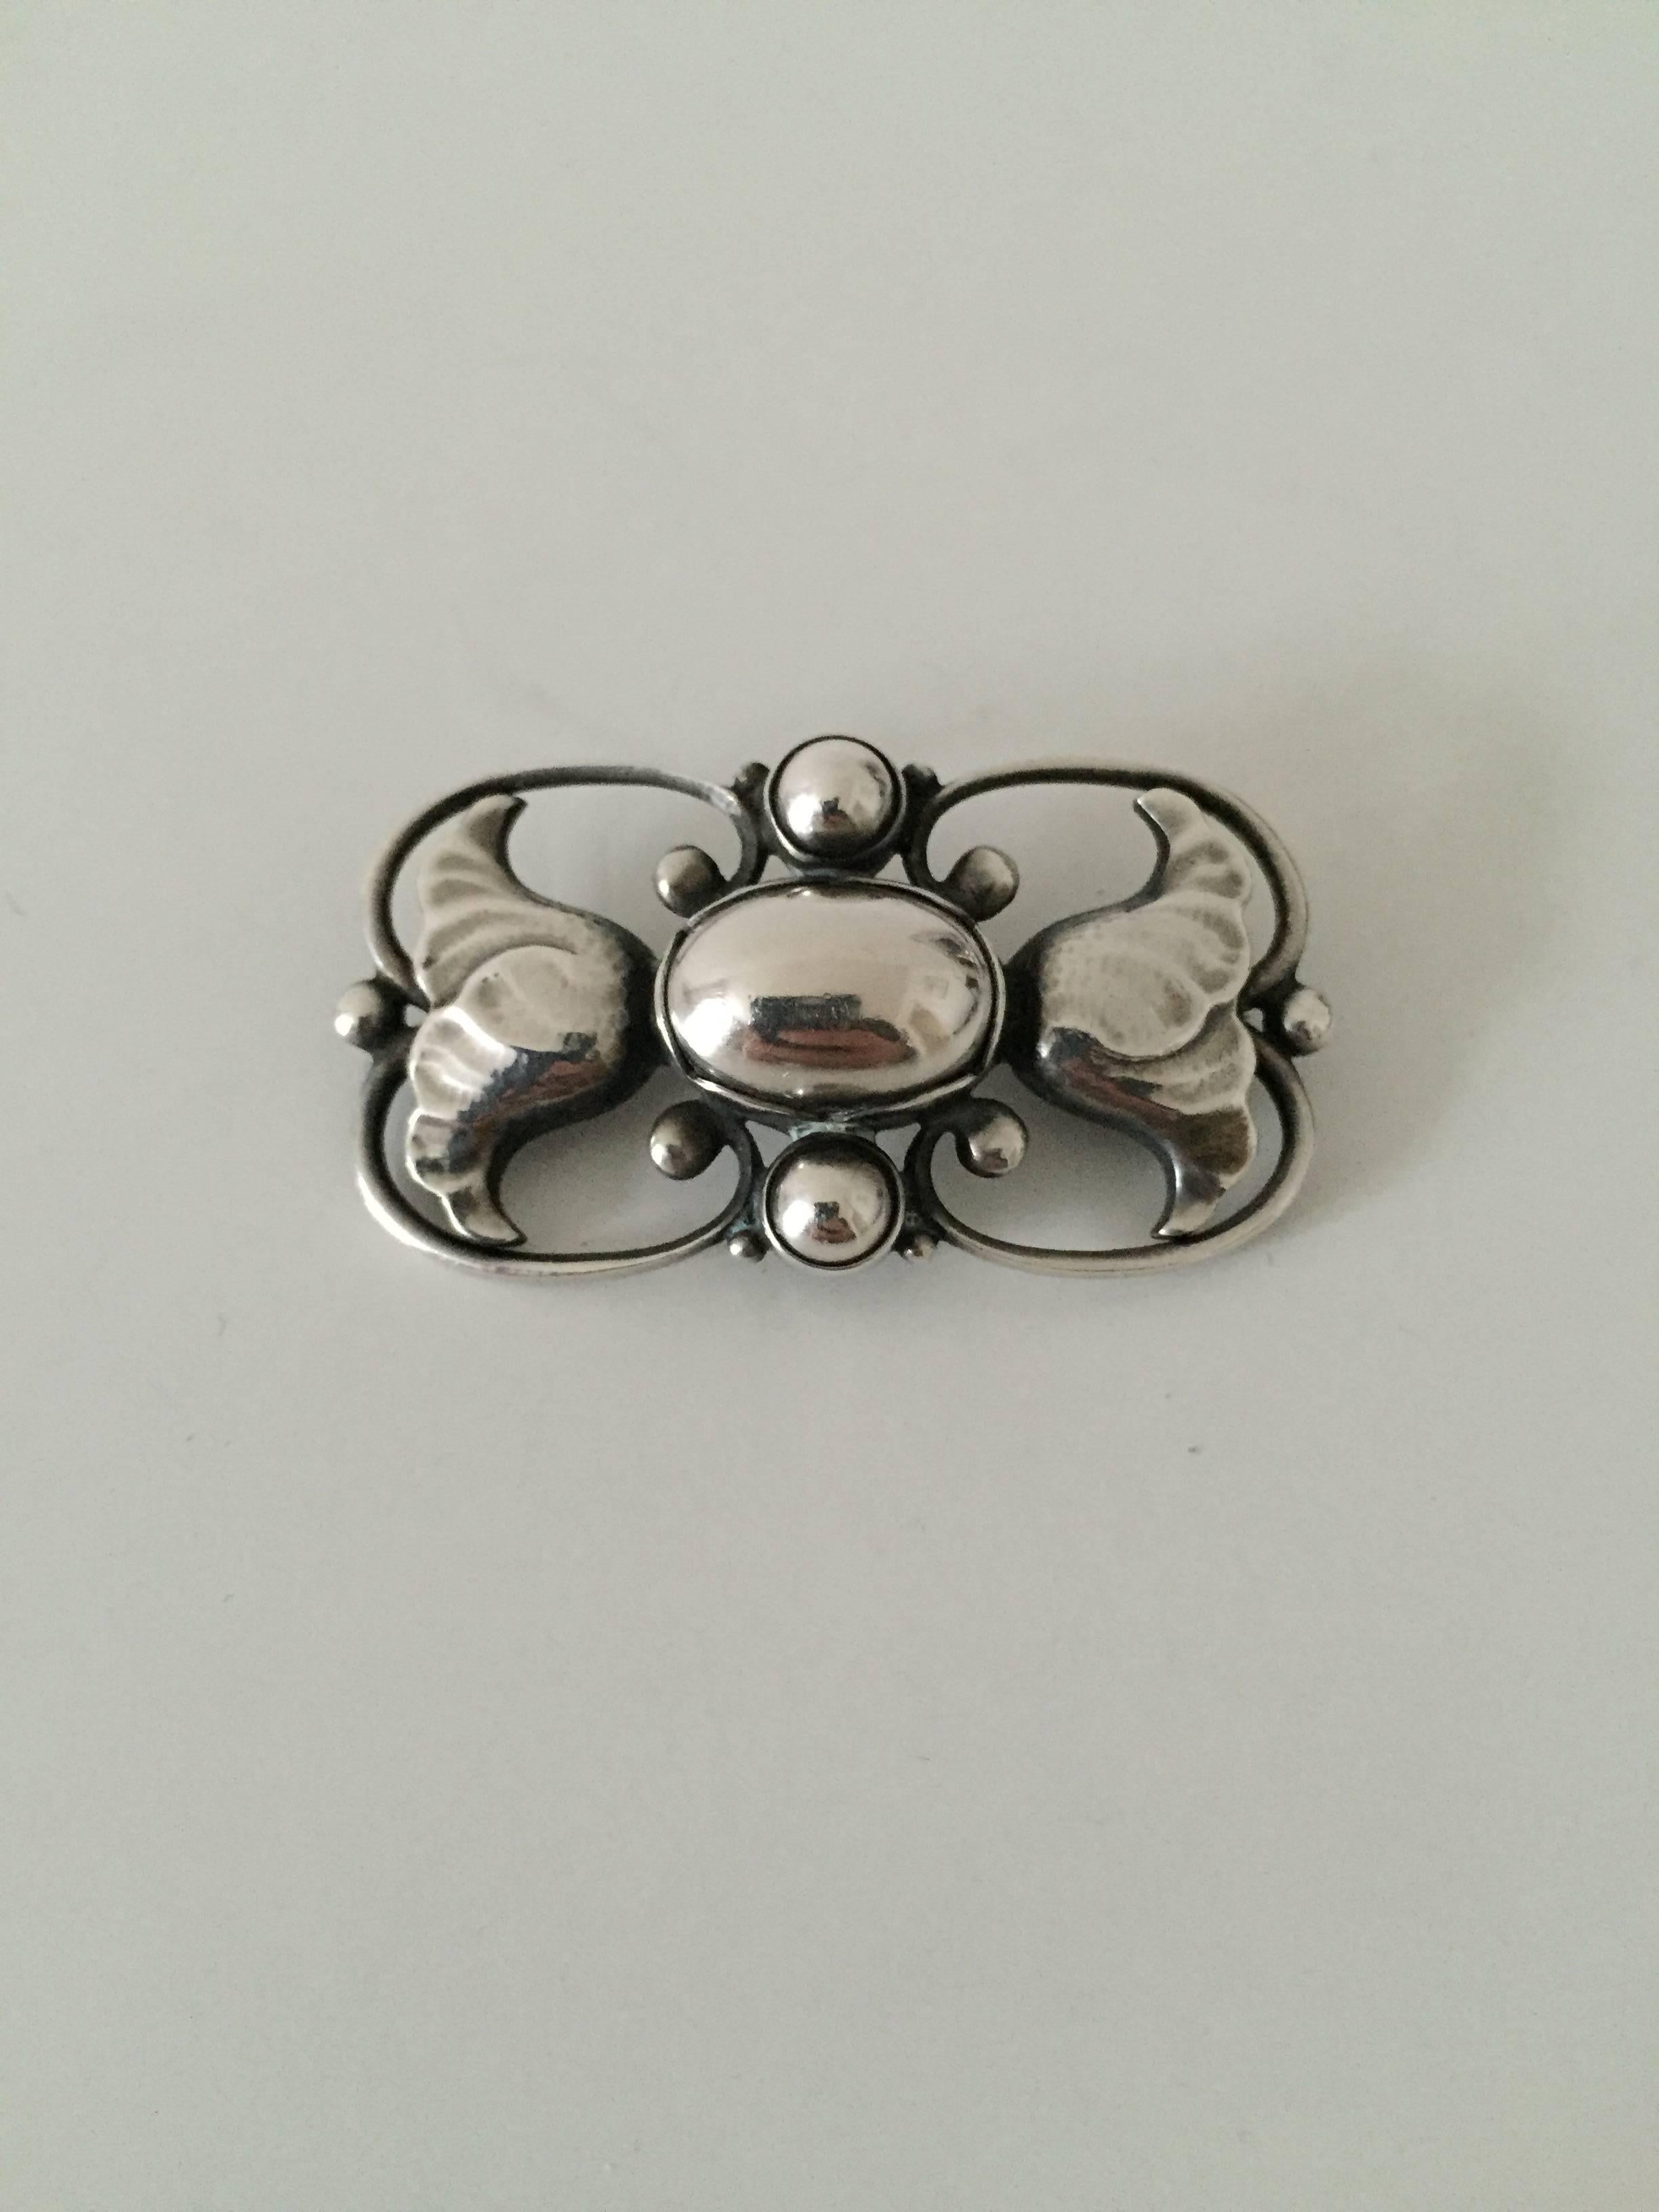 Georg Jensen sterling silver brooch #236A. 

Measures: 4 cm x 2 cm.
Weighs 9g / 0.30oz.

Georg Jensen (1866-1935) opened his small silver atelier in Copenhagen, Denmark in 1904. By 1935 the year of his death, he had received world acclaim and